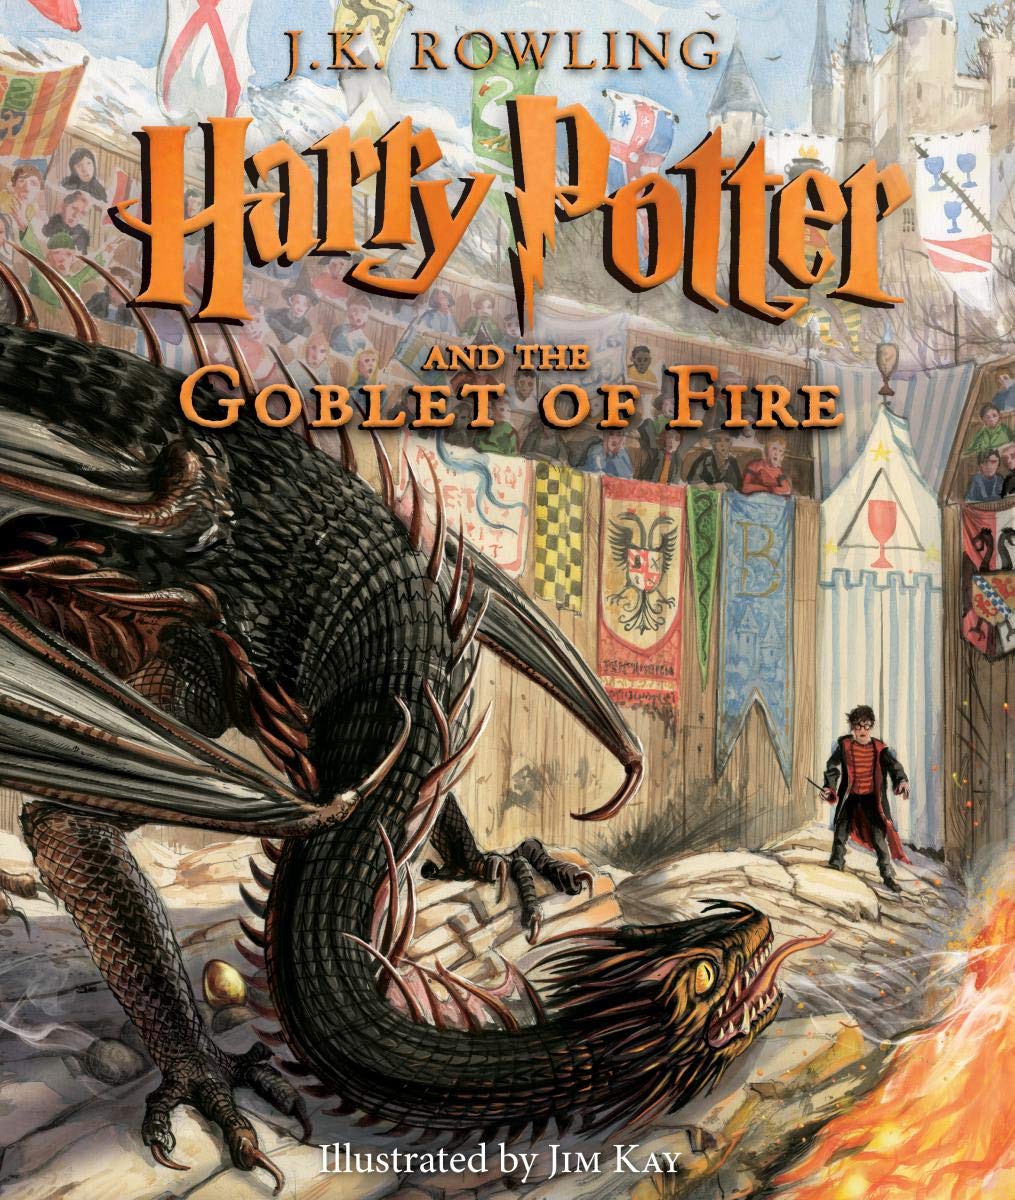 Harry Potter and the Goblet of Fire: The Illustrated Edition Hardcover – Only $28.79!